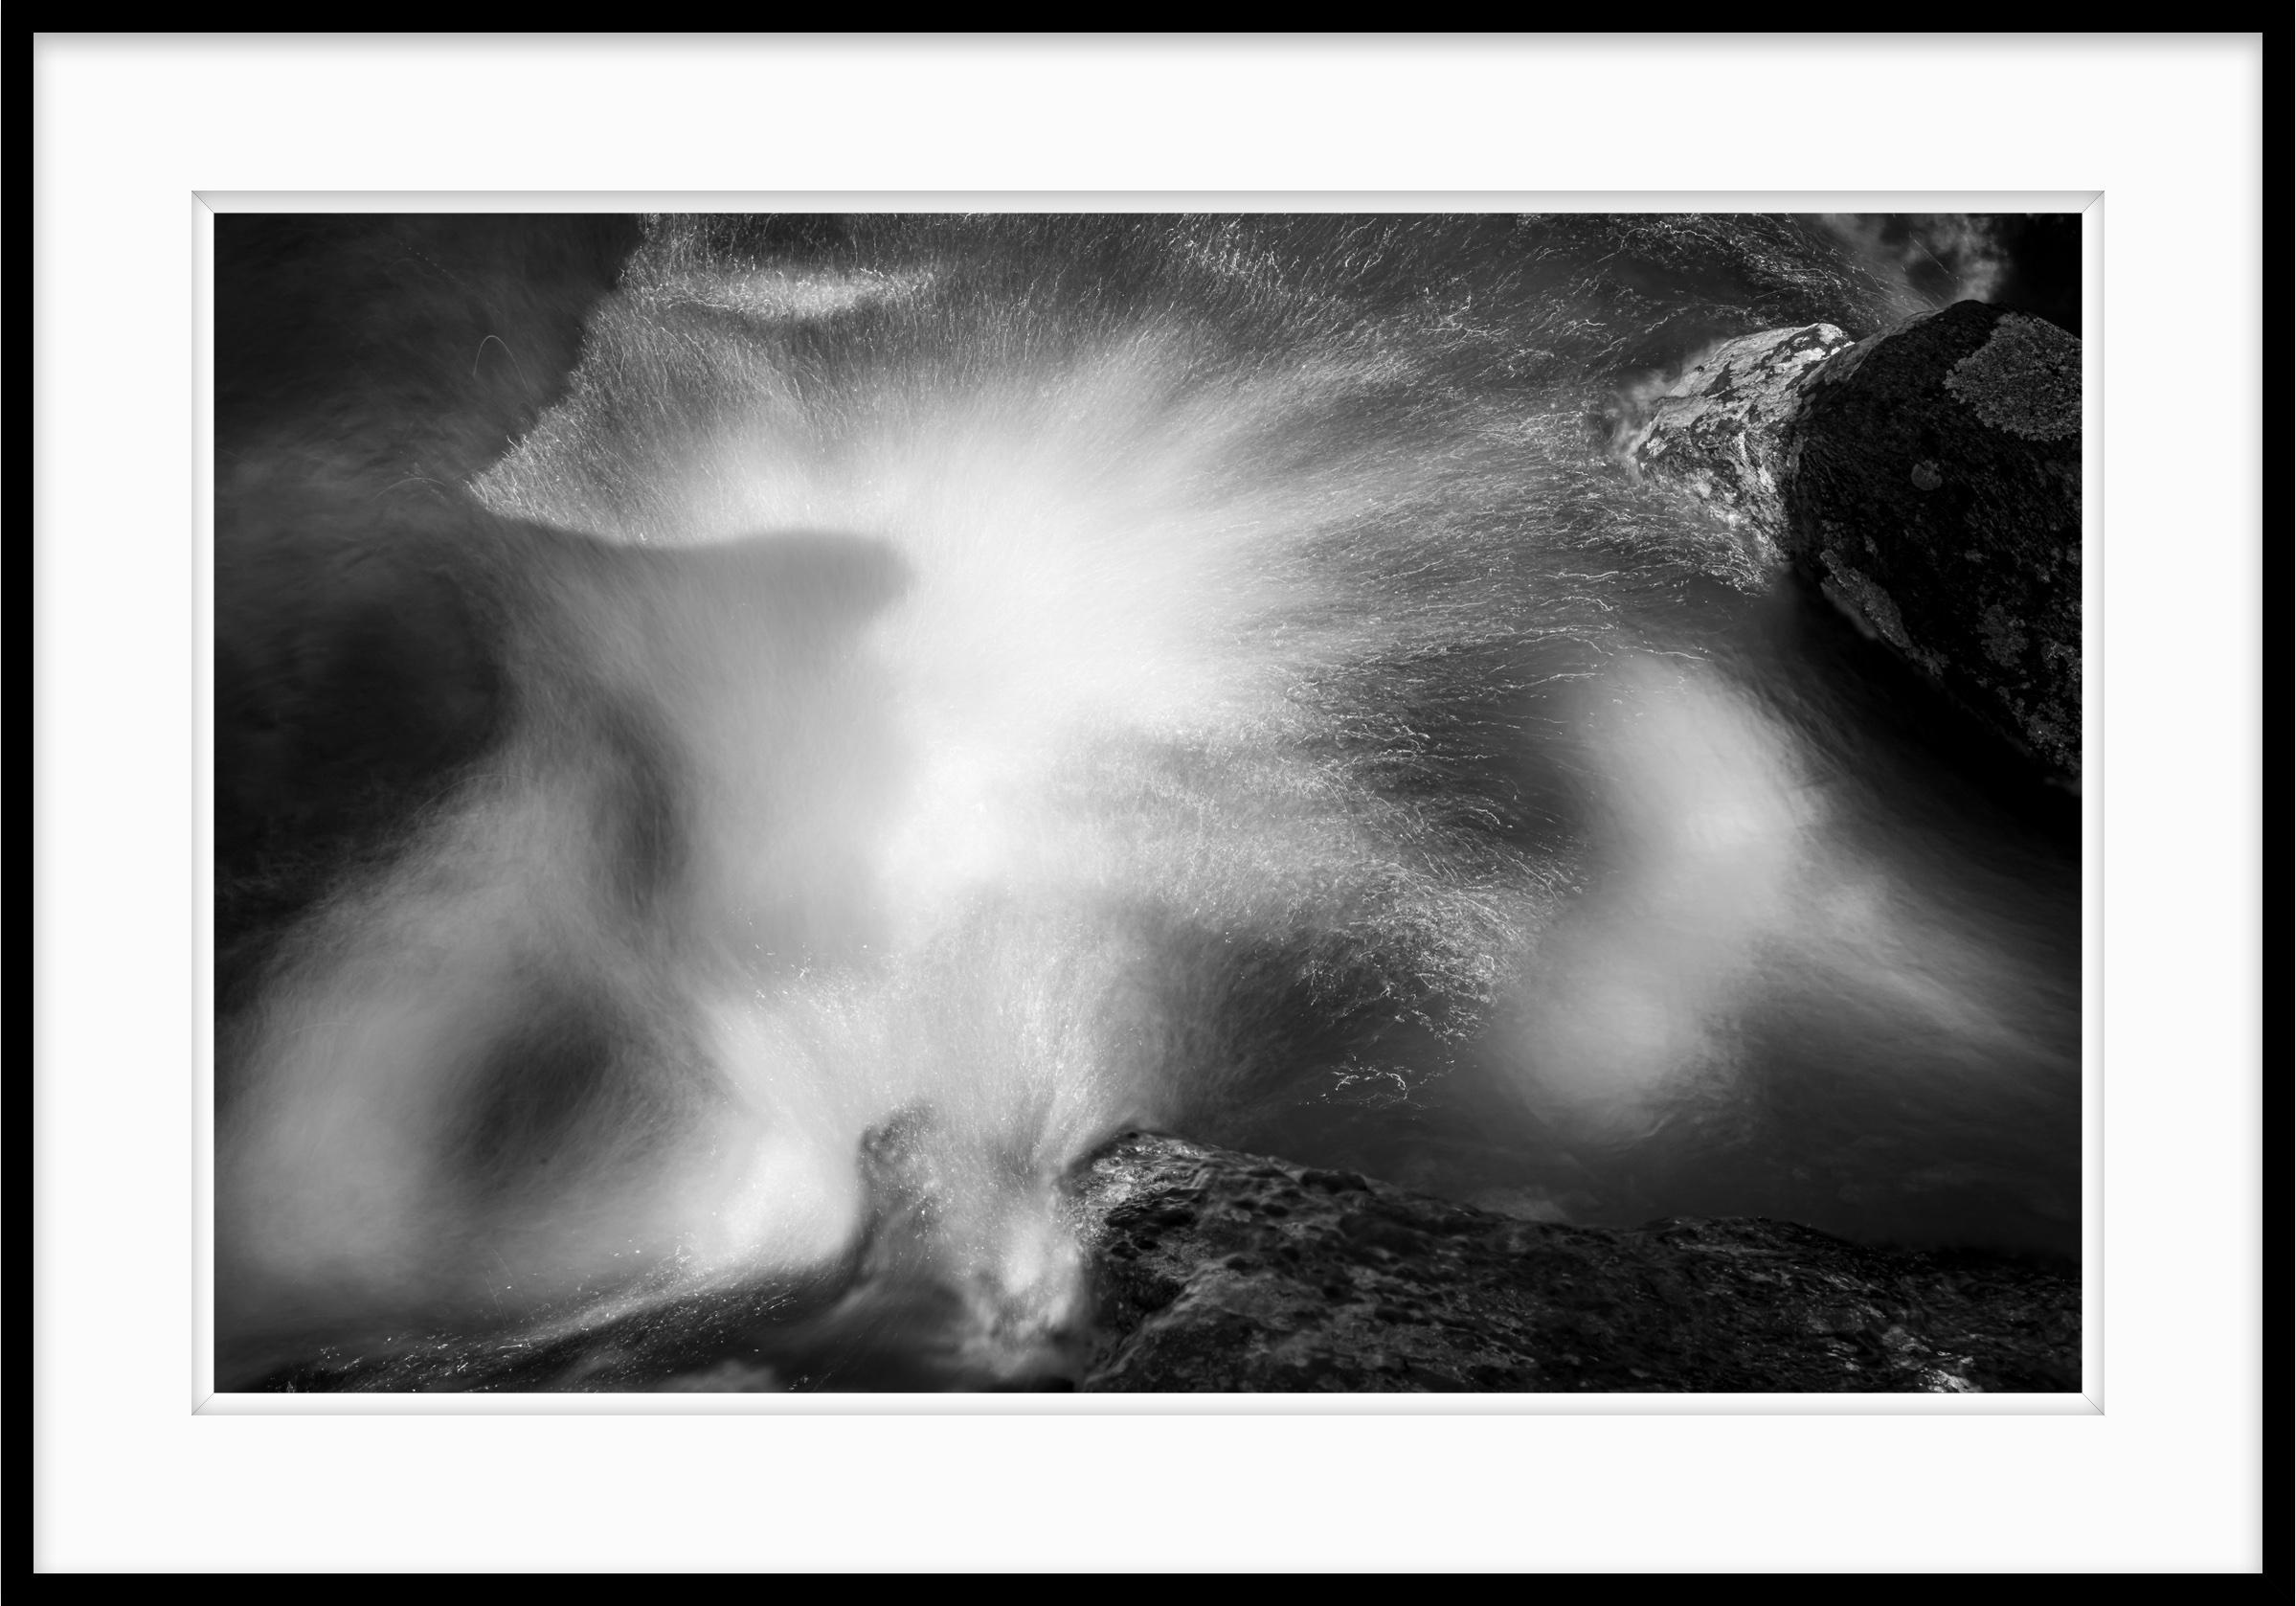 Limited Edition Black and White Photograph - Nature and Water Abstract

This is Rock Splash taken in 2021 along a small stream upstate New York.

About Howard Lewis:
Lewis’ artistic practice often explores science, engineering, technology, and